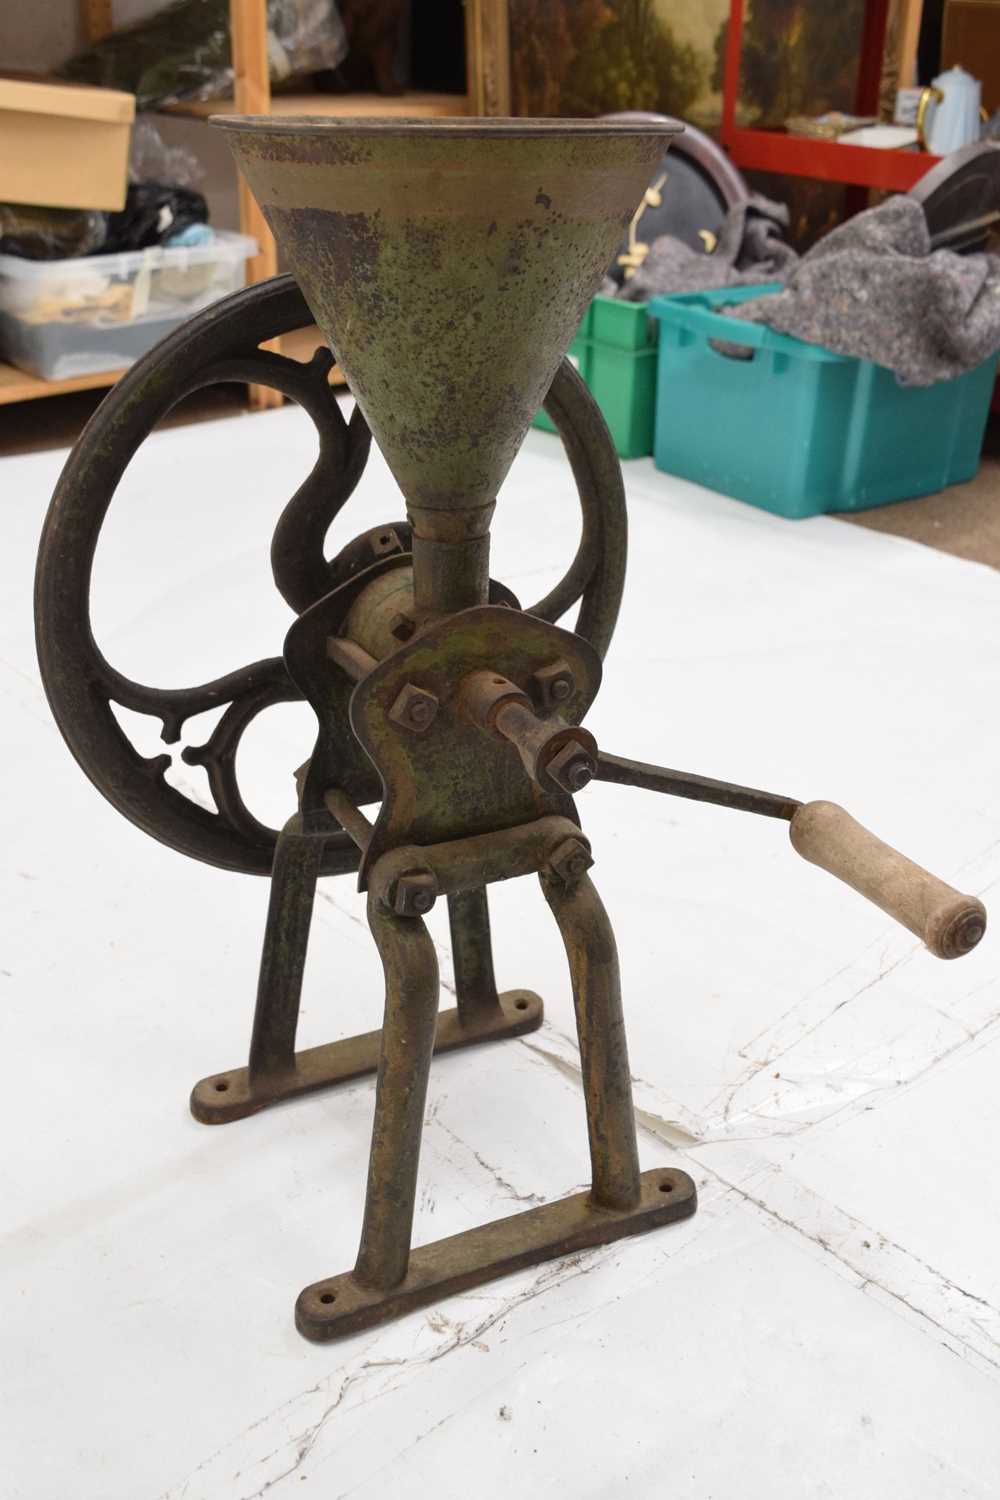 Late 19th century metal coffee grinder - Image 6 of 6